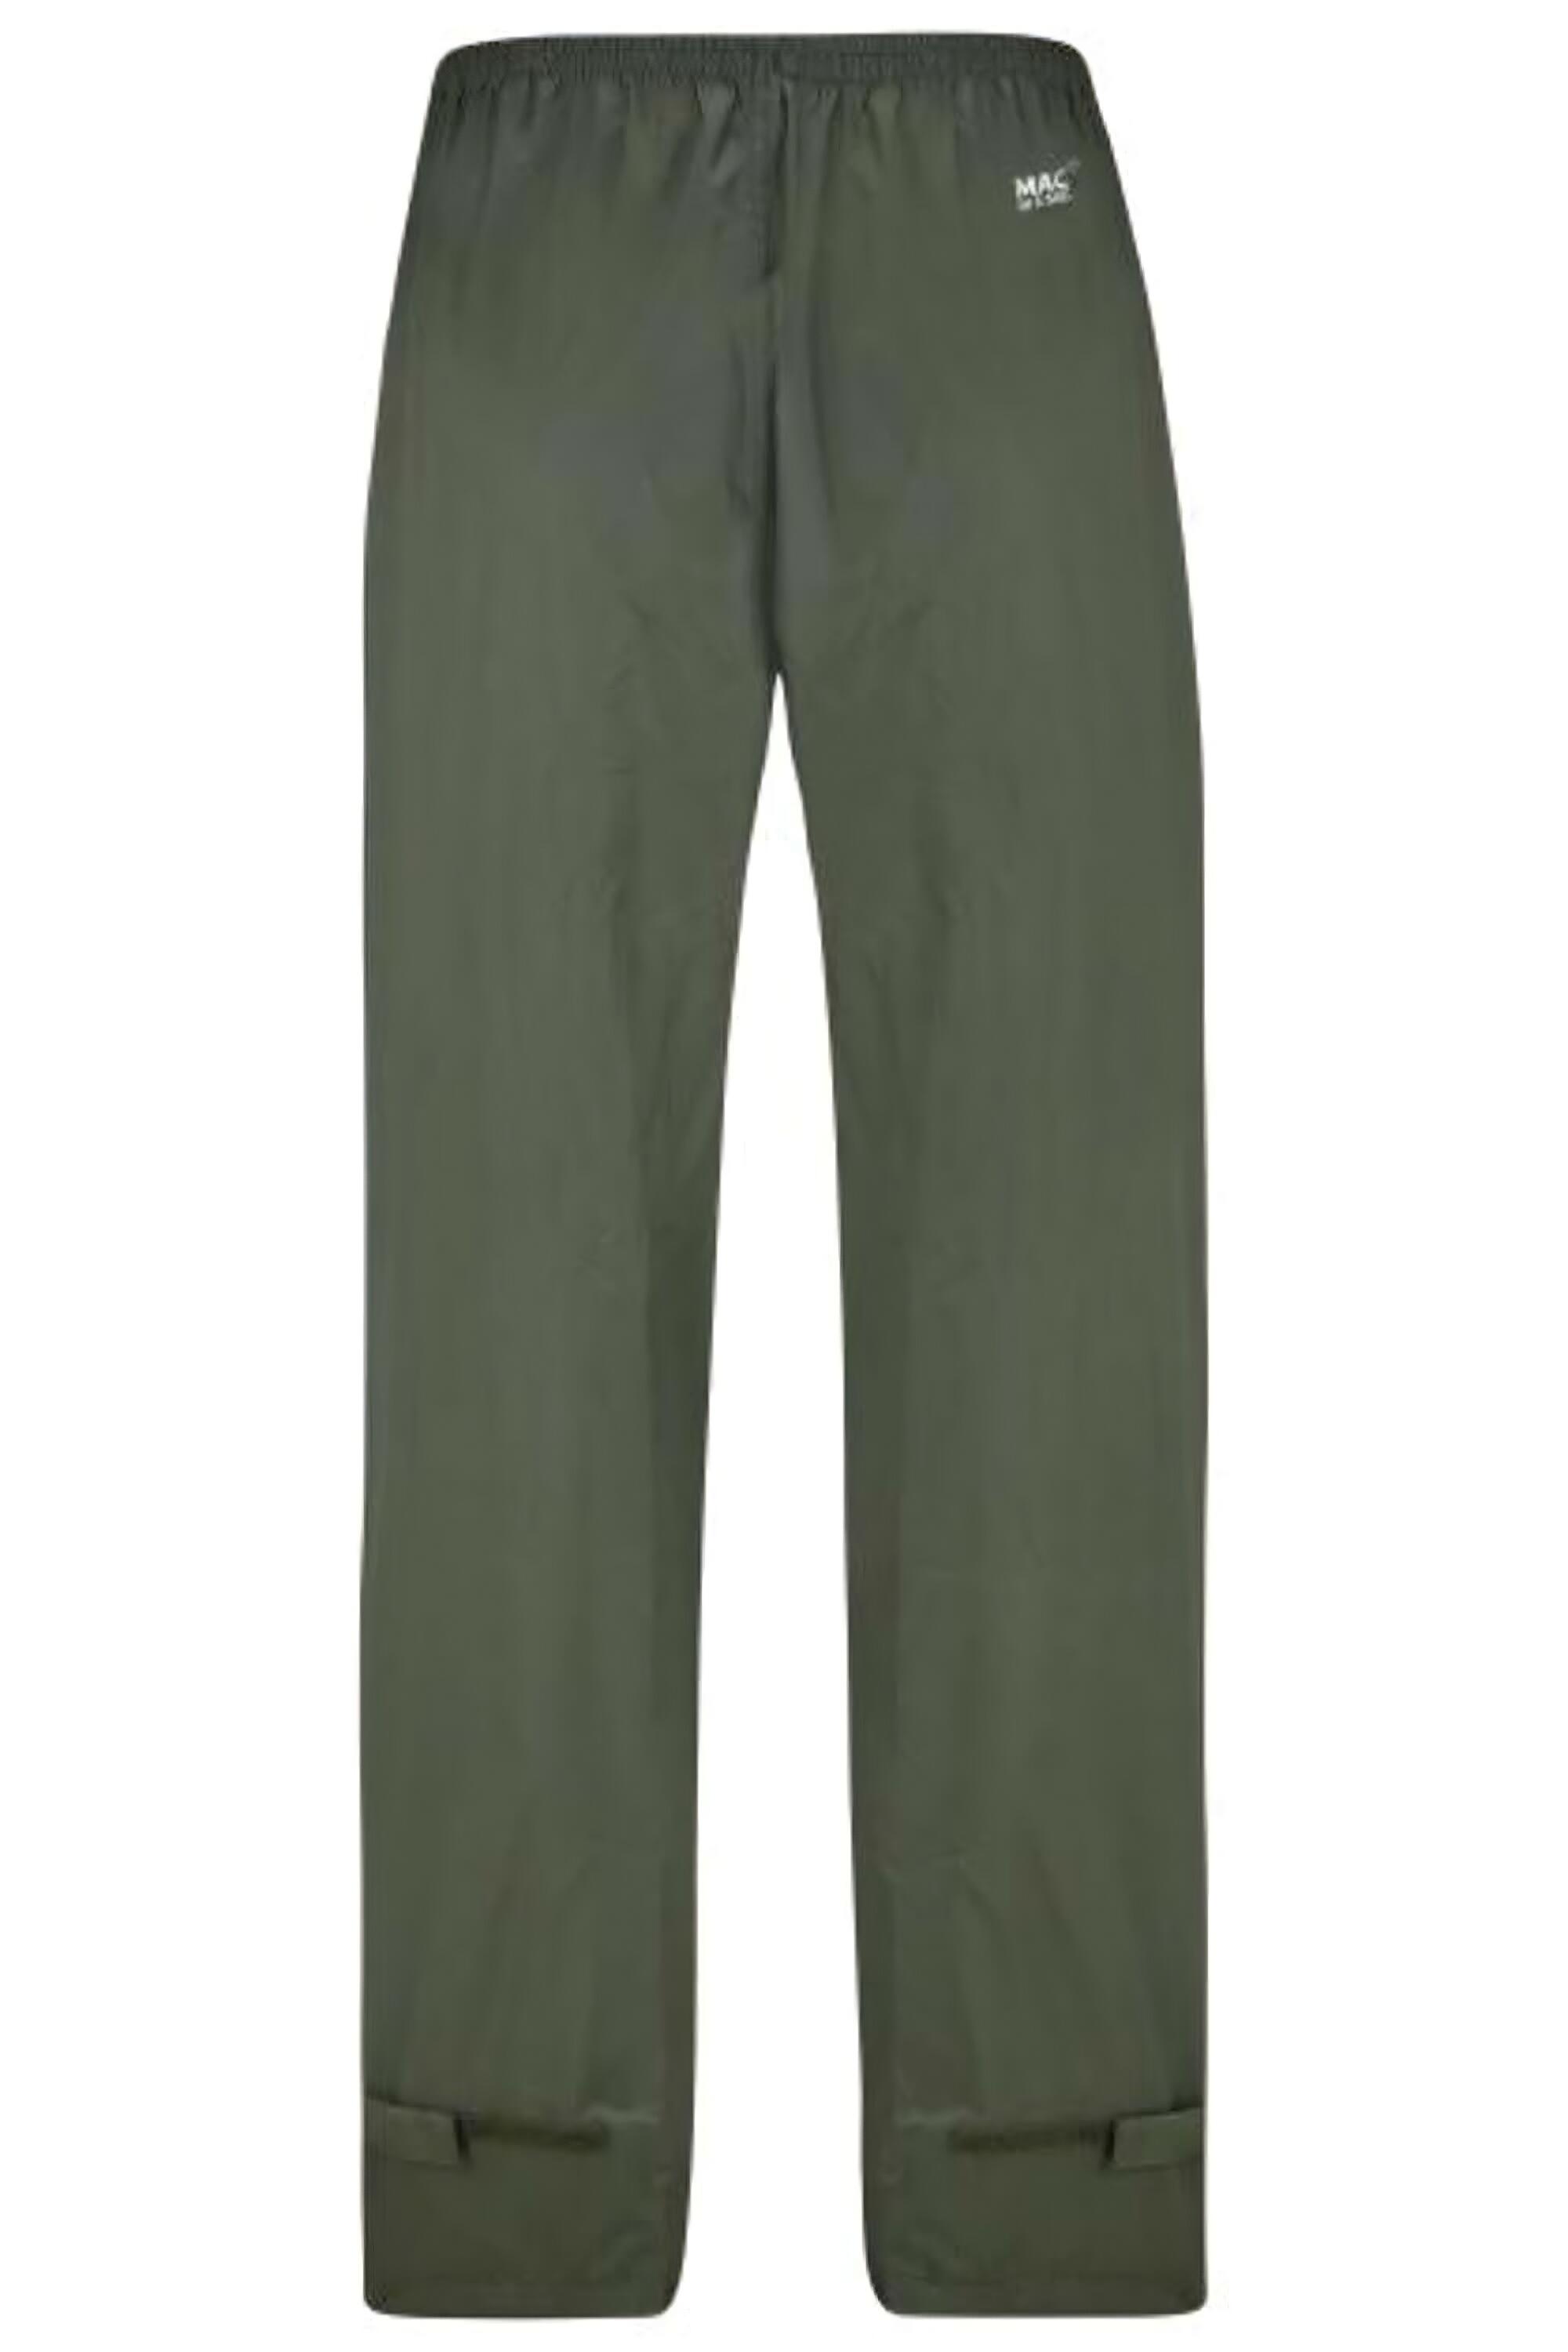 MAC IN A SAC Unisex Packable Waterproof Overtrousers